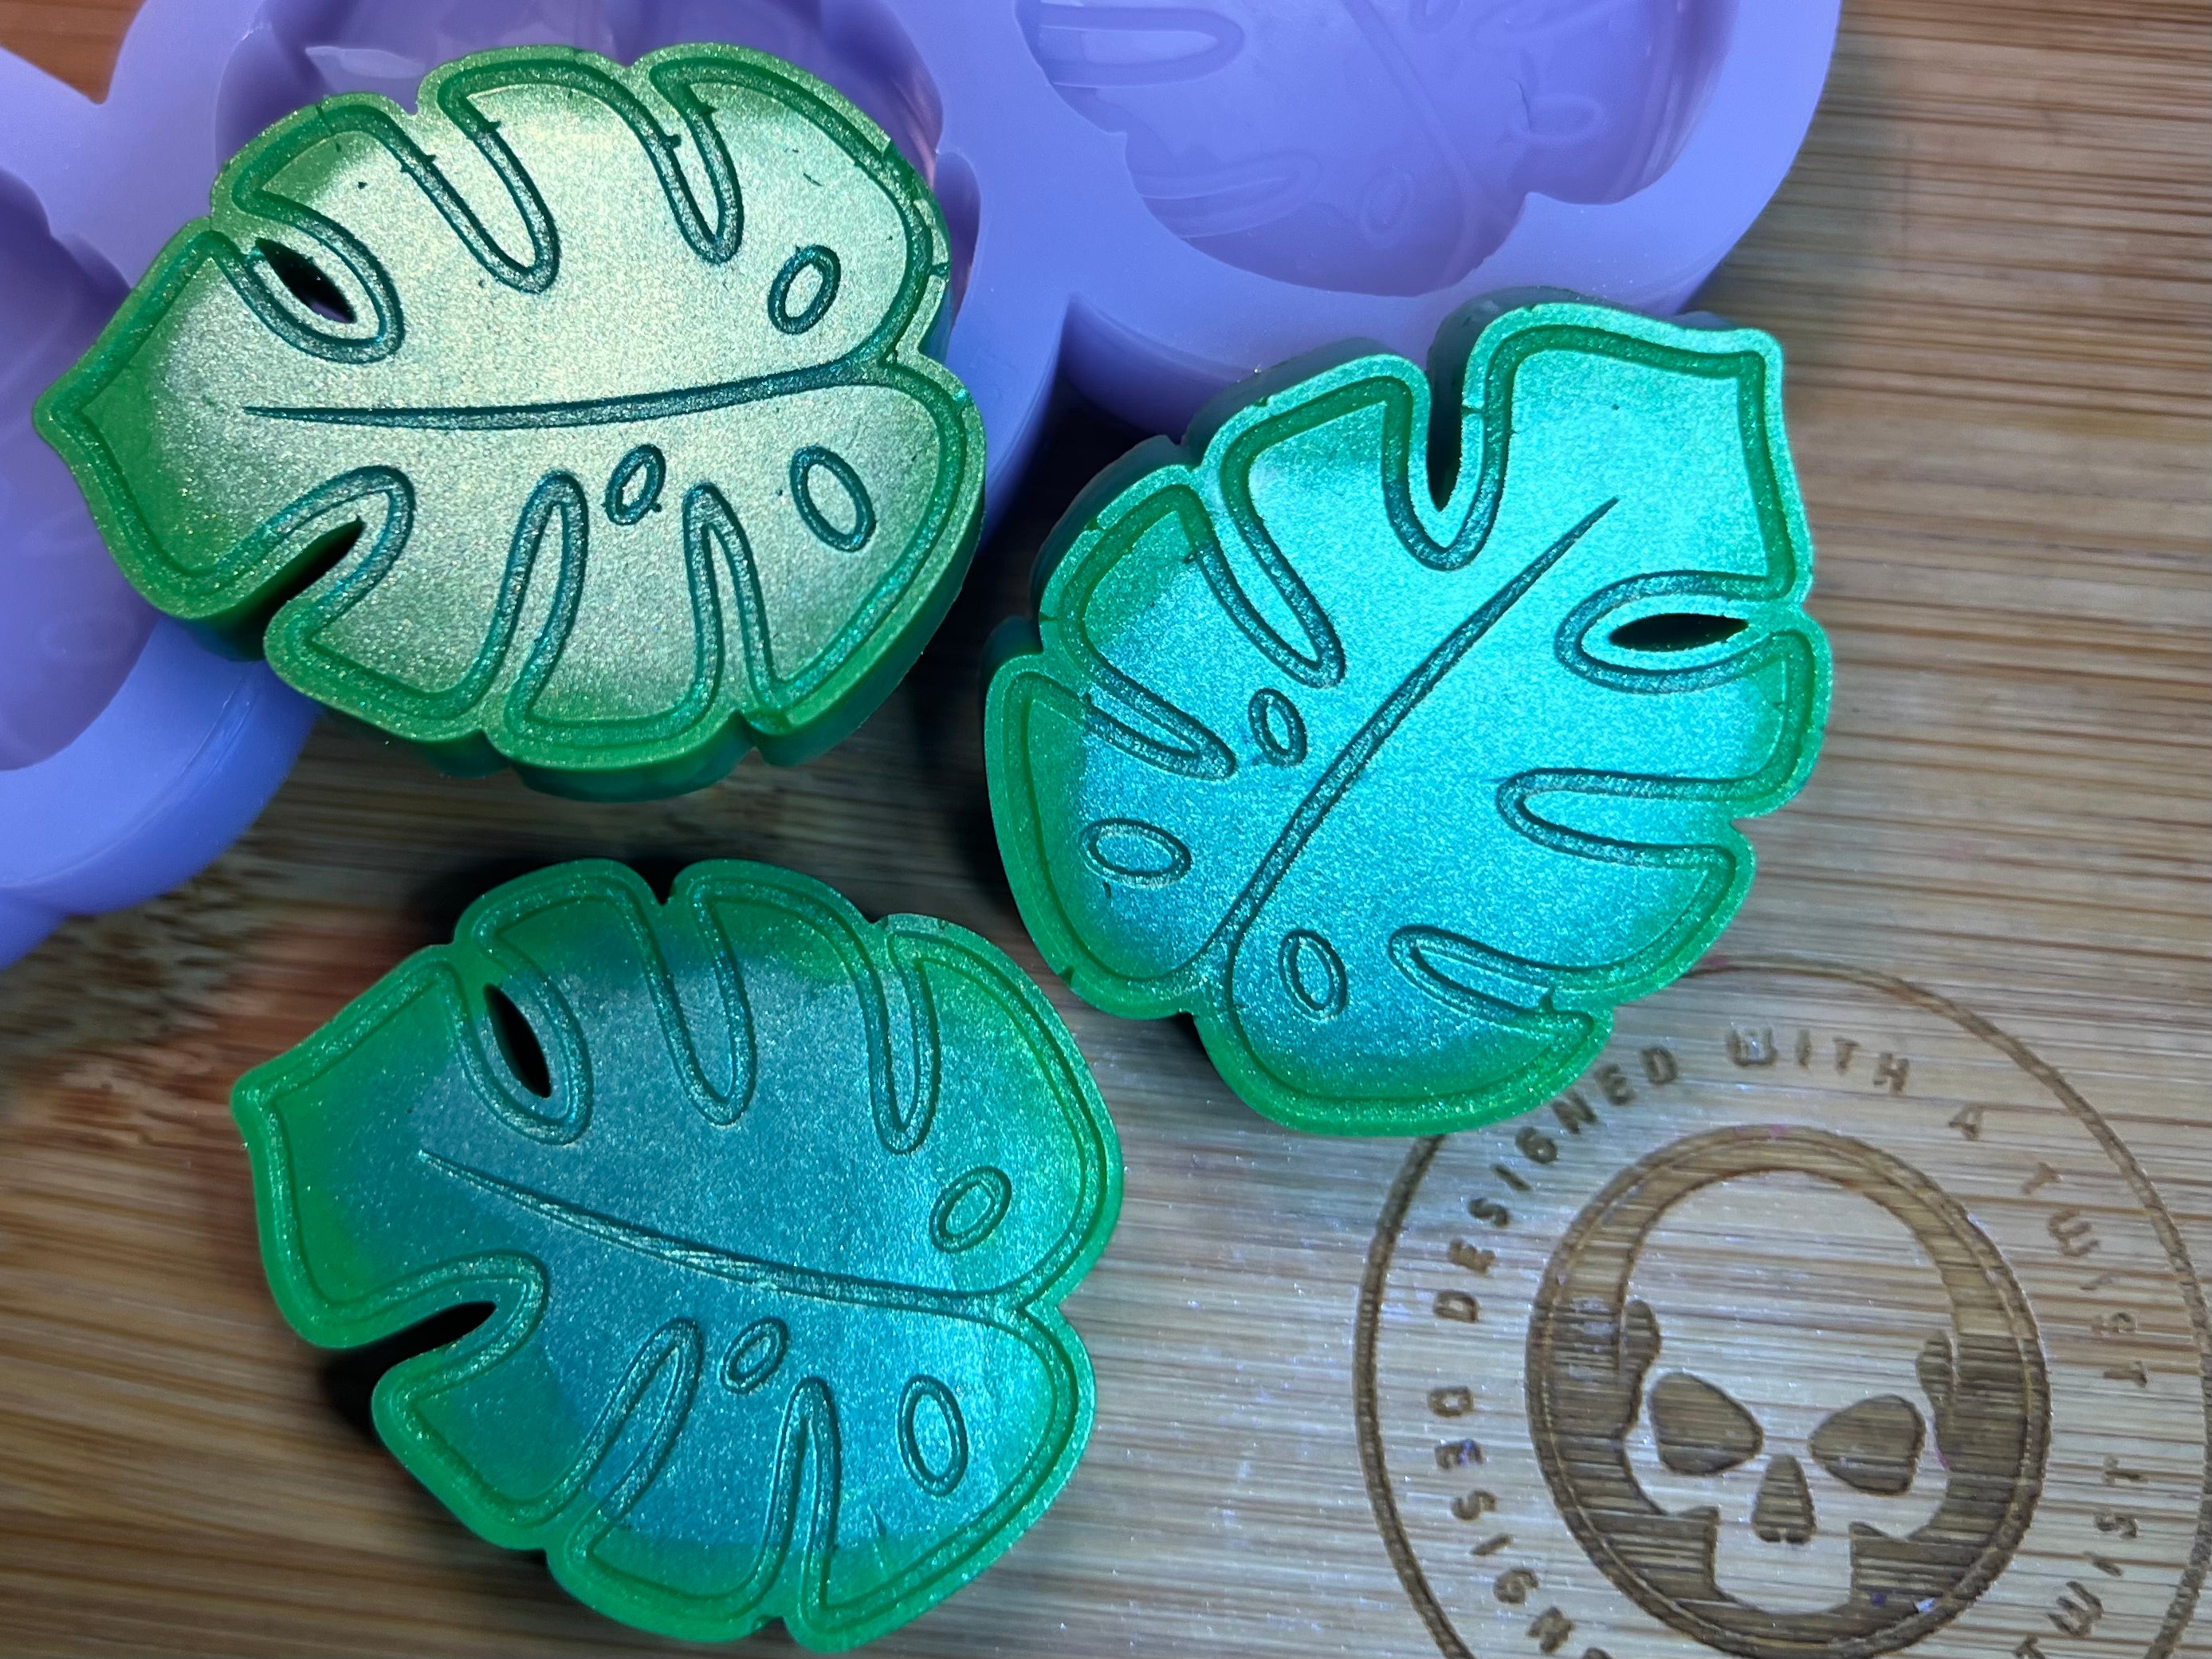 Monstera Leaves Wax Melt Silicone Mold - Designed with a Twist - Top quality silicone molds made in the UK.